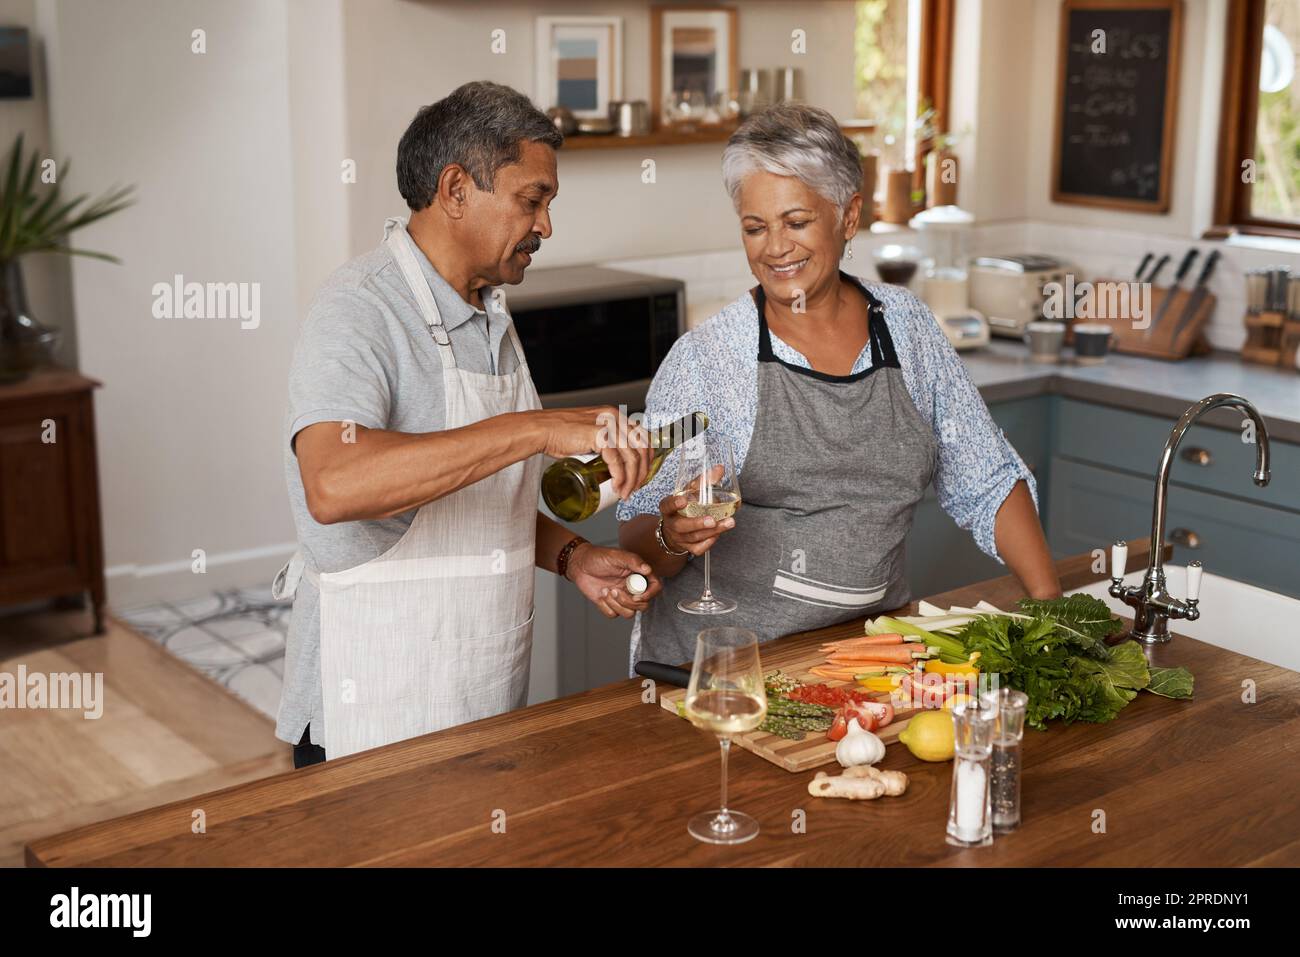 Retirement - no work, no worries. a happy mature couple drinking wine while cooking a meal together at home. Stock Photo